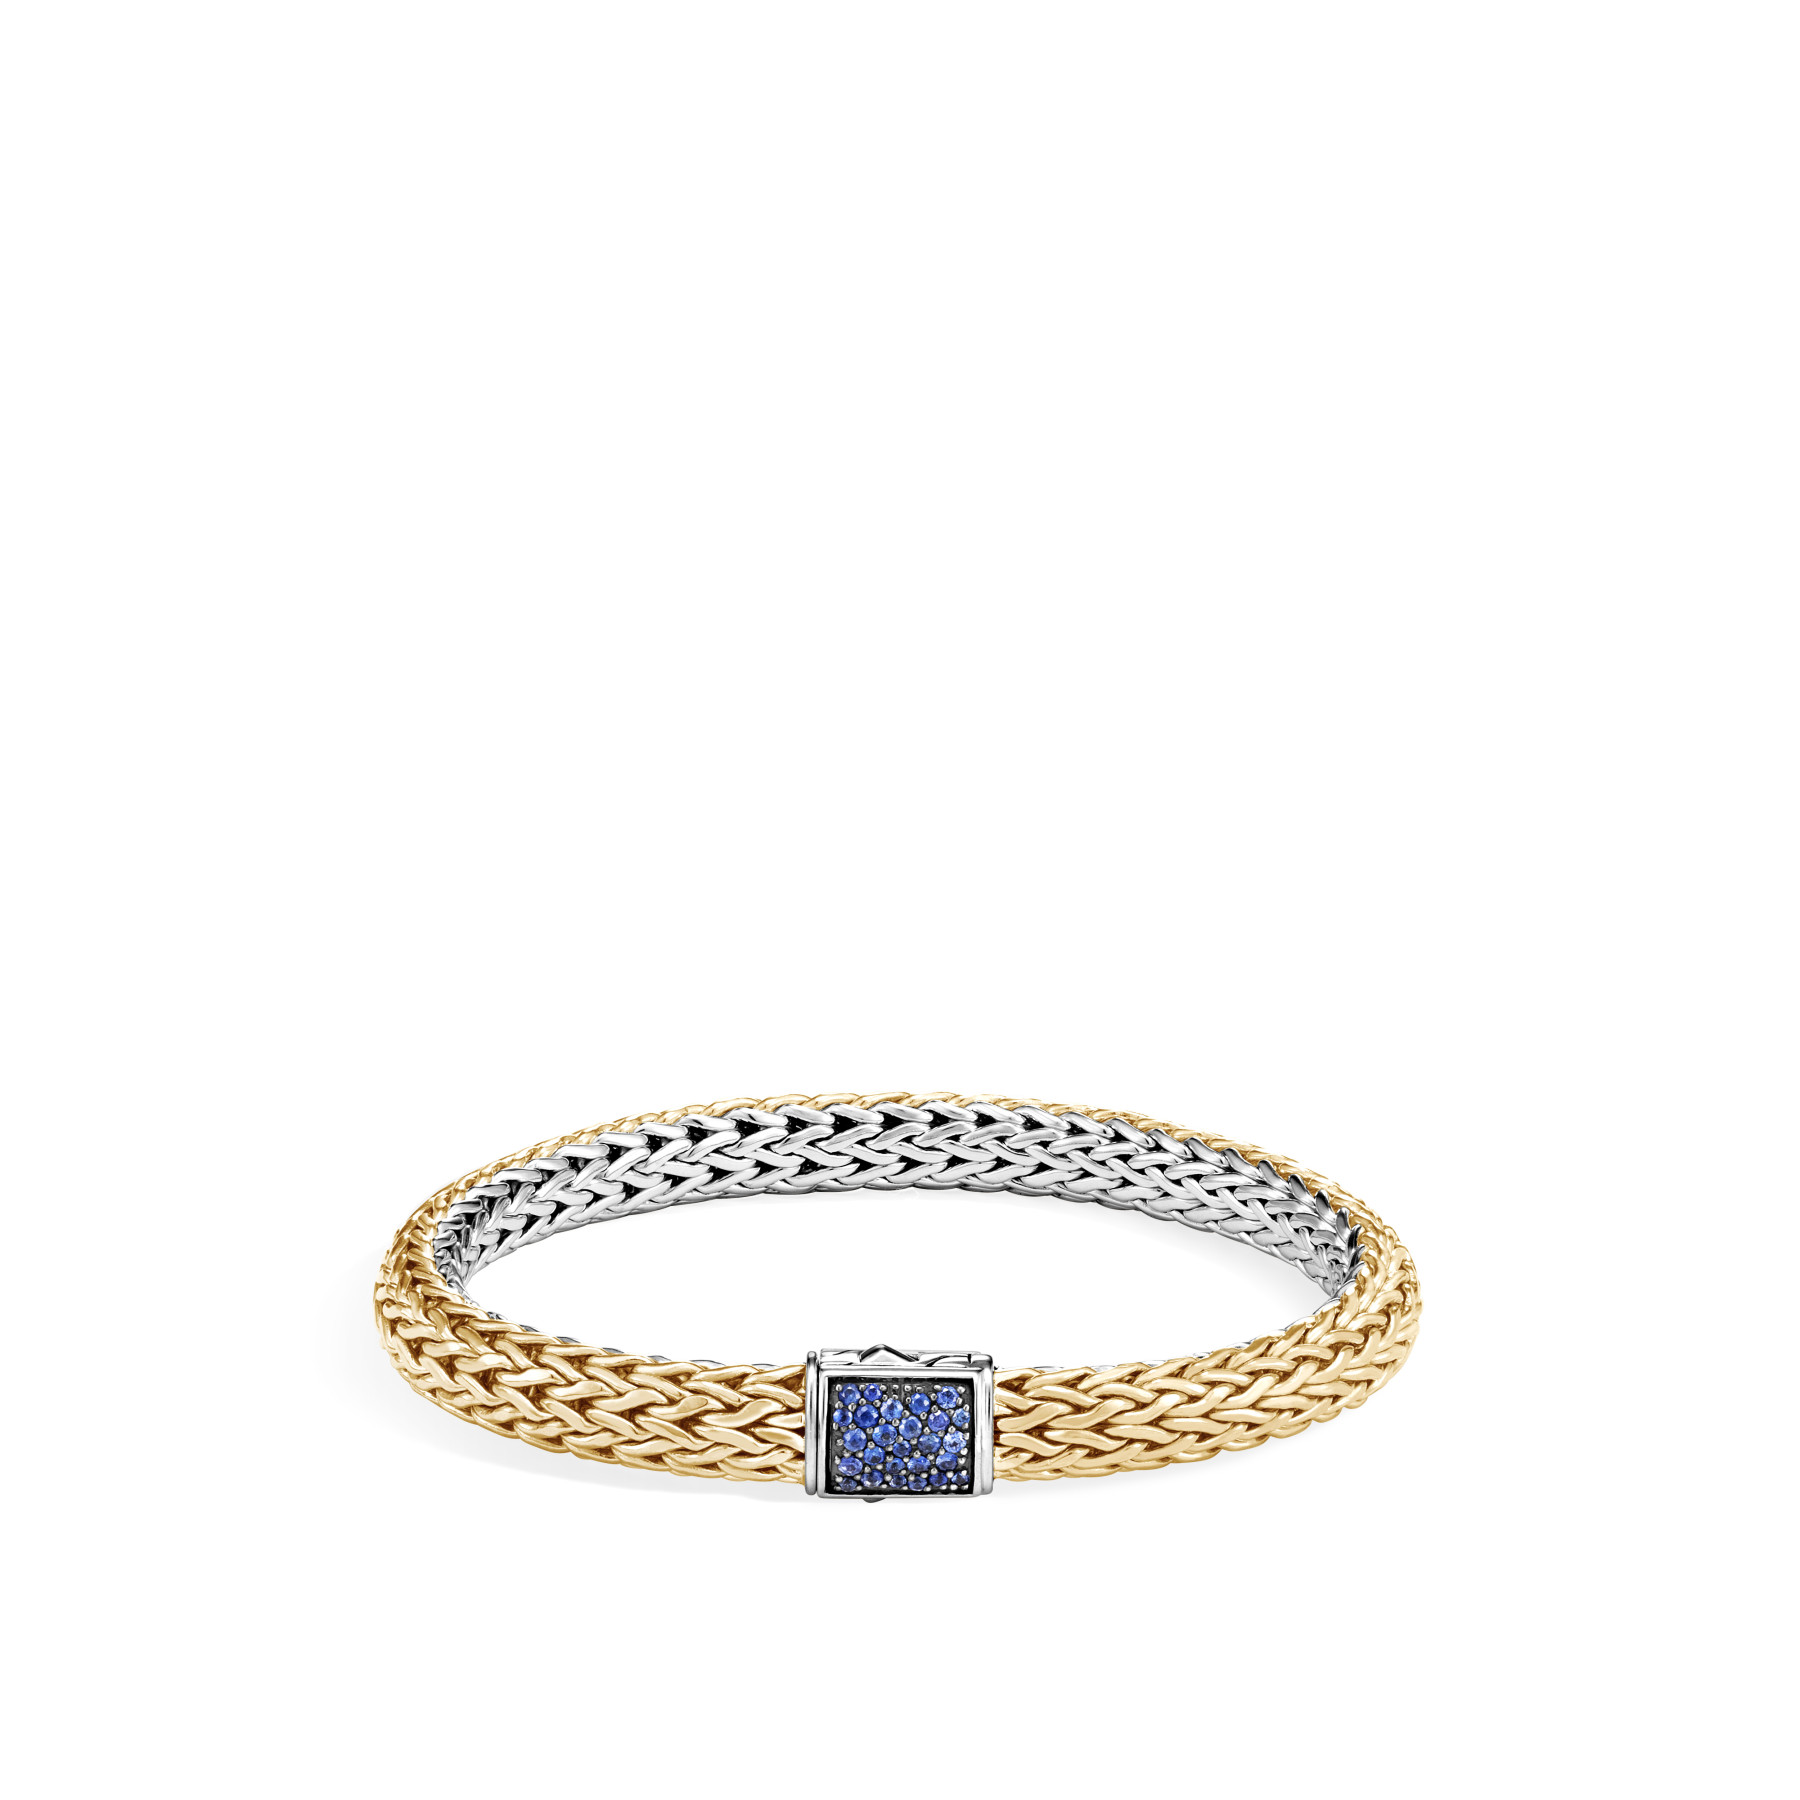 John Hardy Classic Chain Two Tone Gemstone Bracelet with Diamonds and Sapphires (7.5mm) front image gold